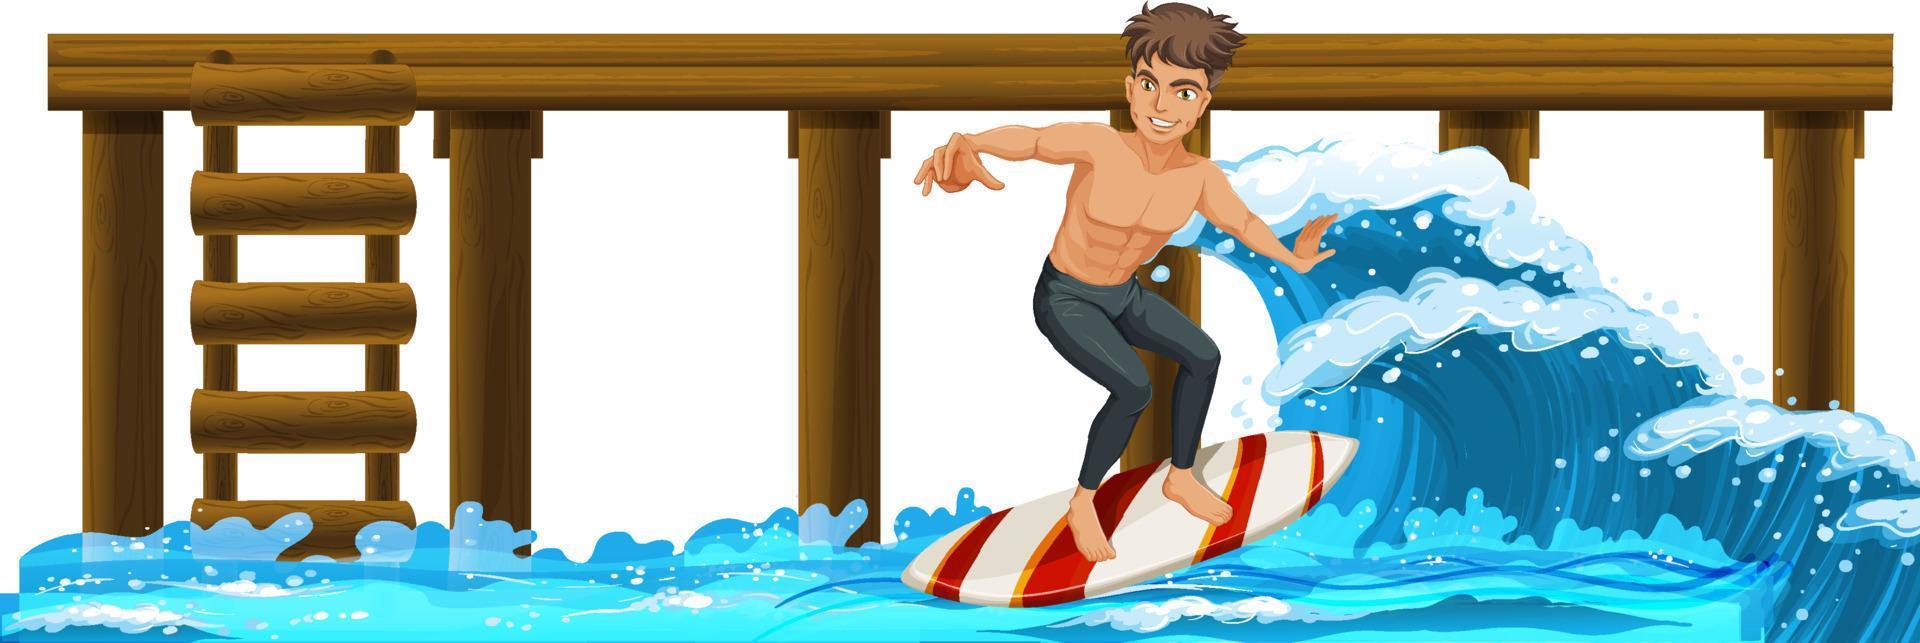 Wooden pier with a man on surfboard vector